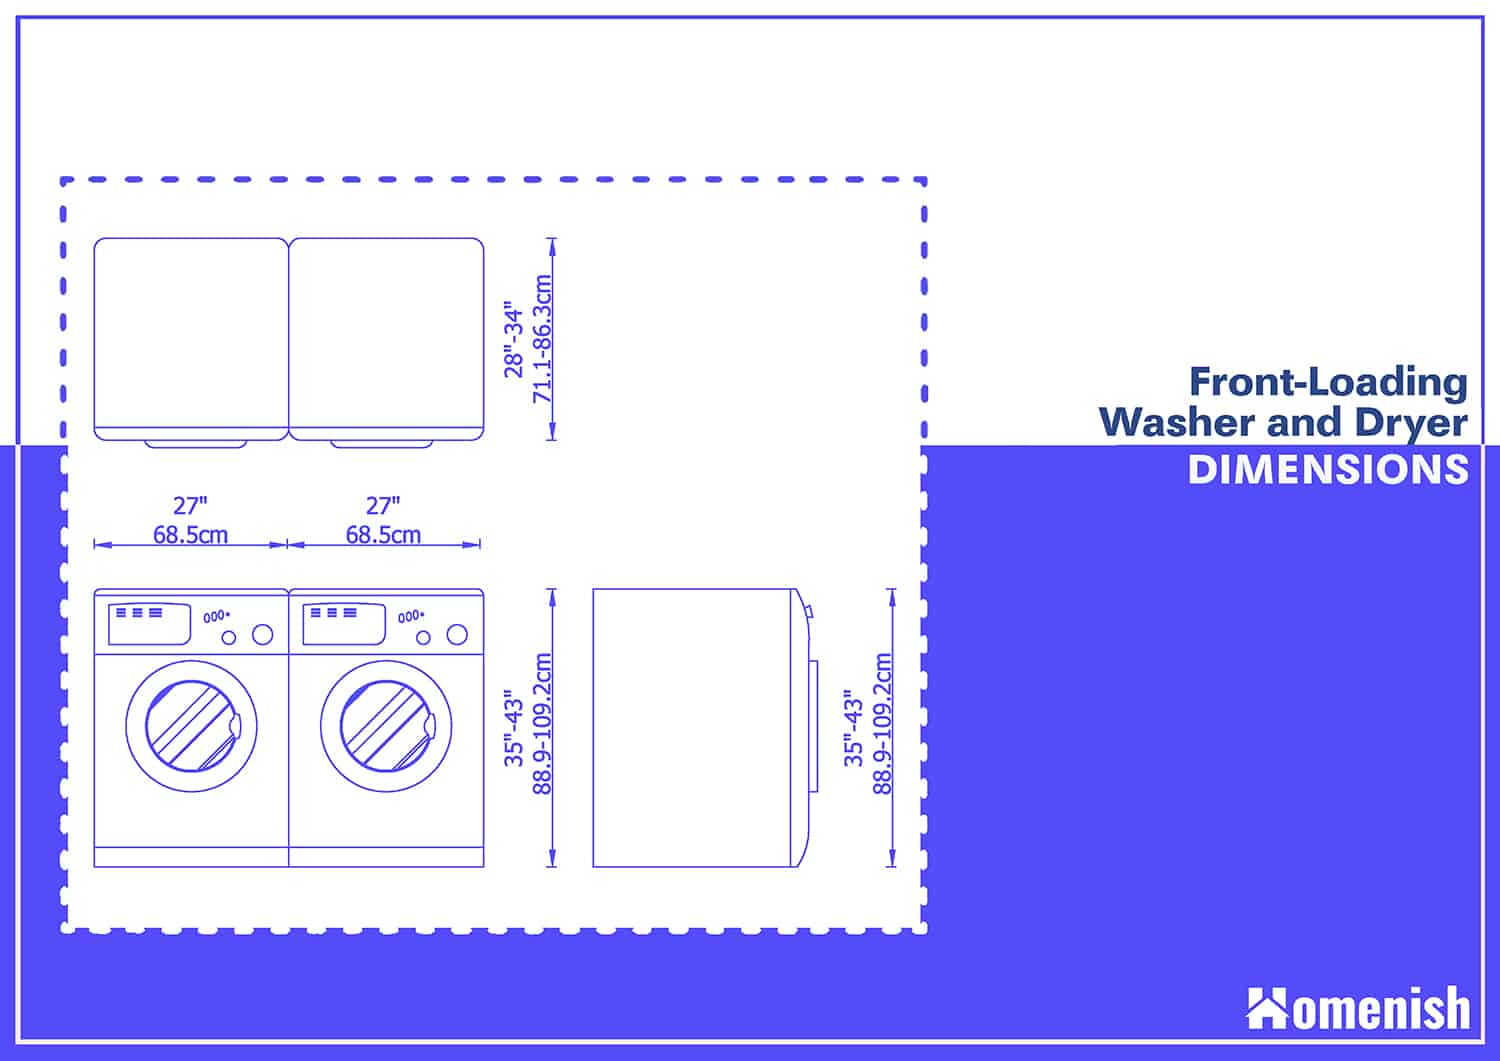 Front-Loading Washer and Dryer Dimensions